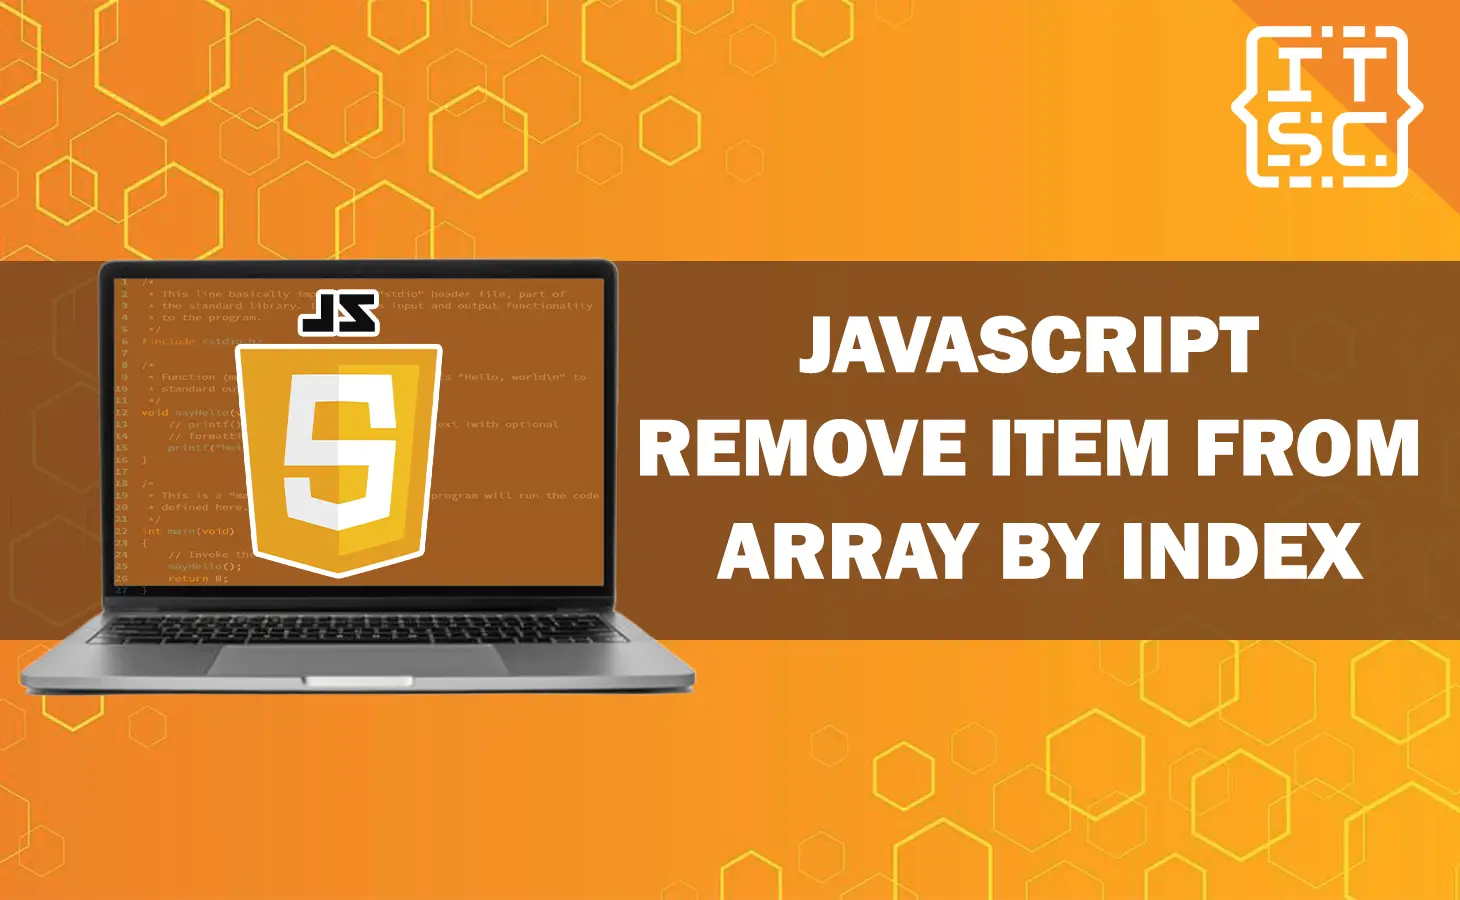 JavaScript Remove Item from Array by Index